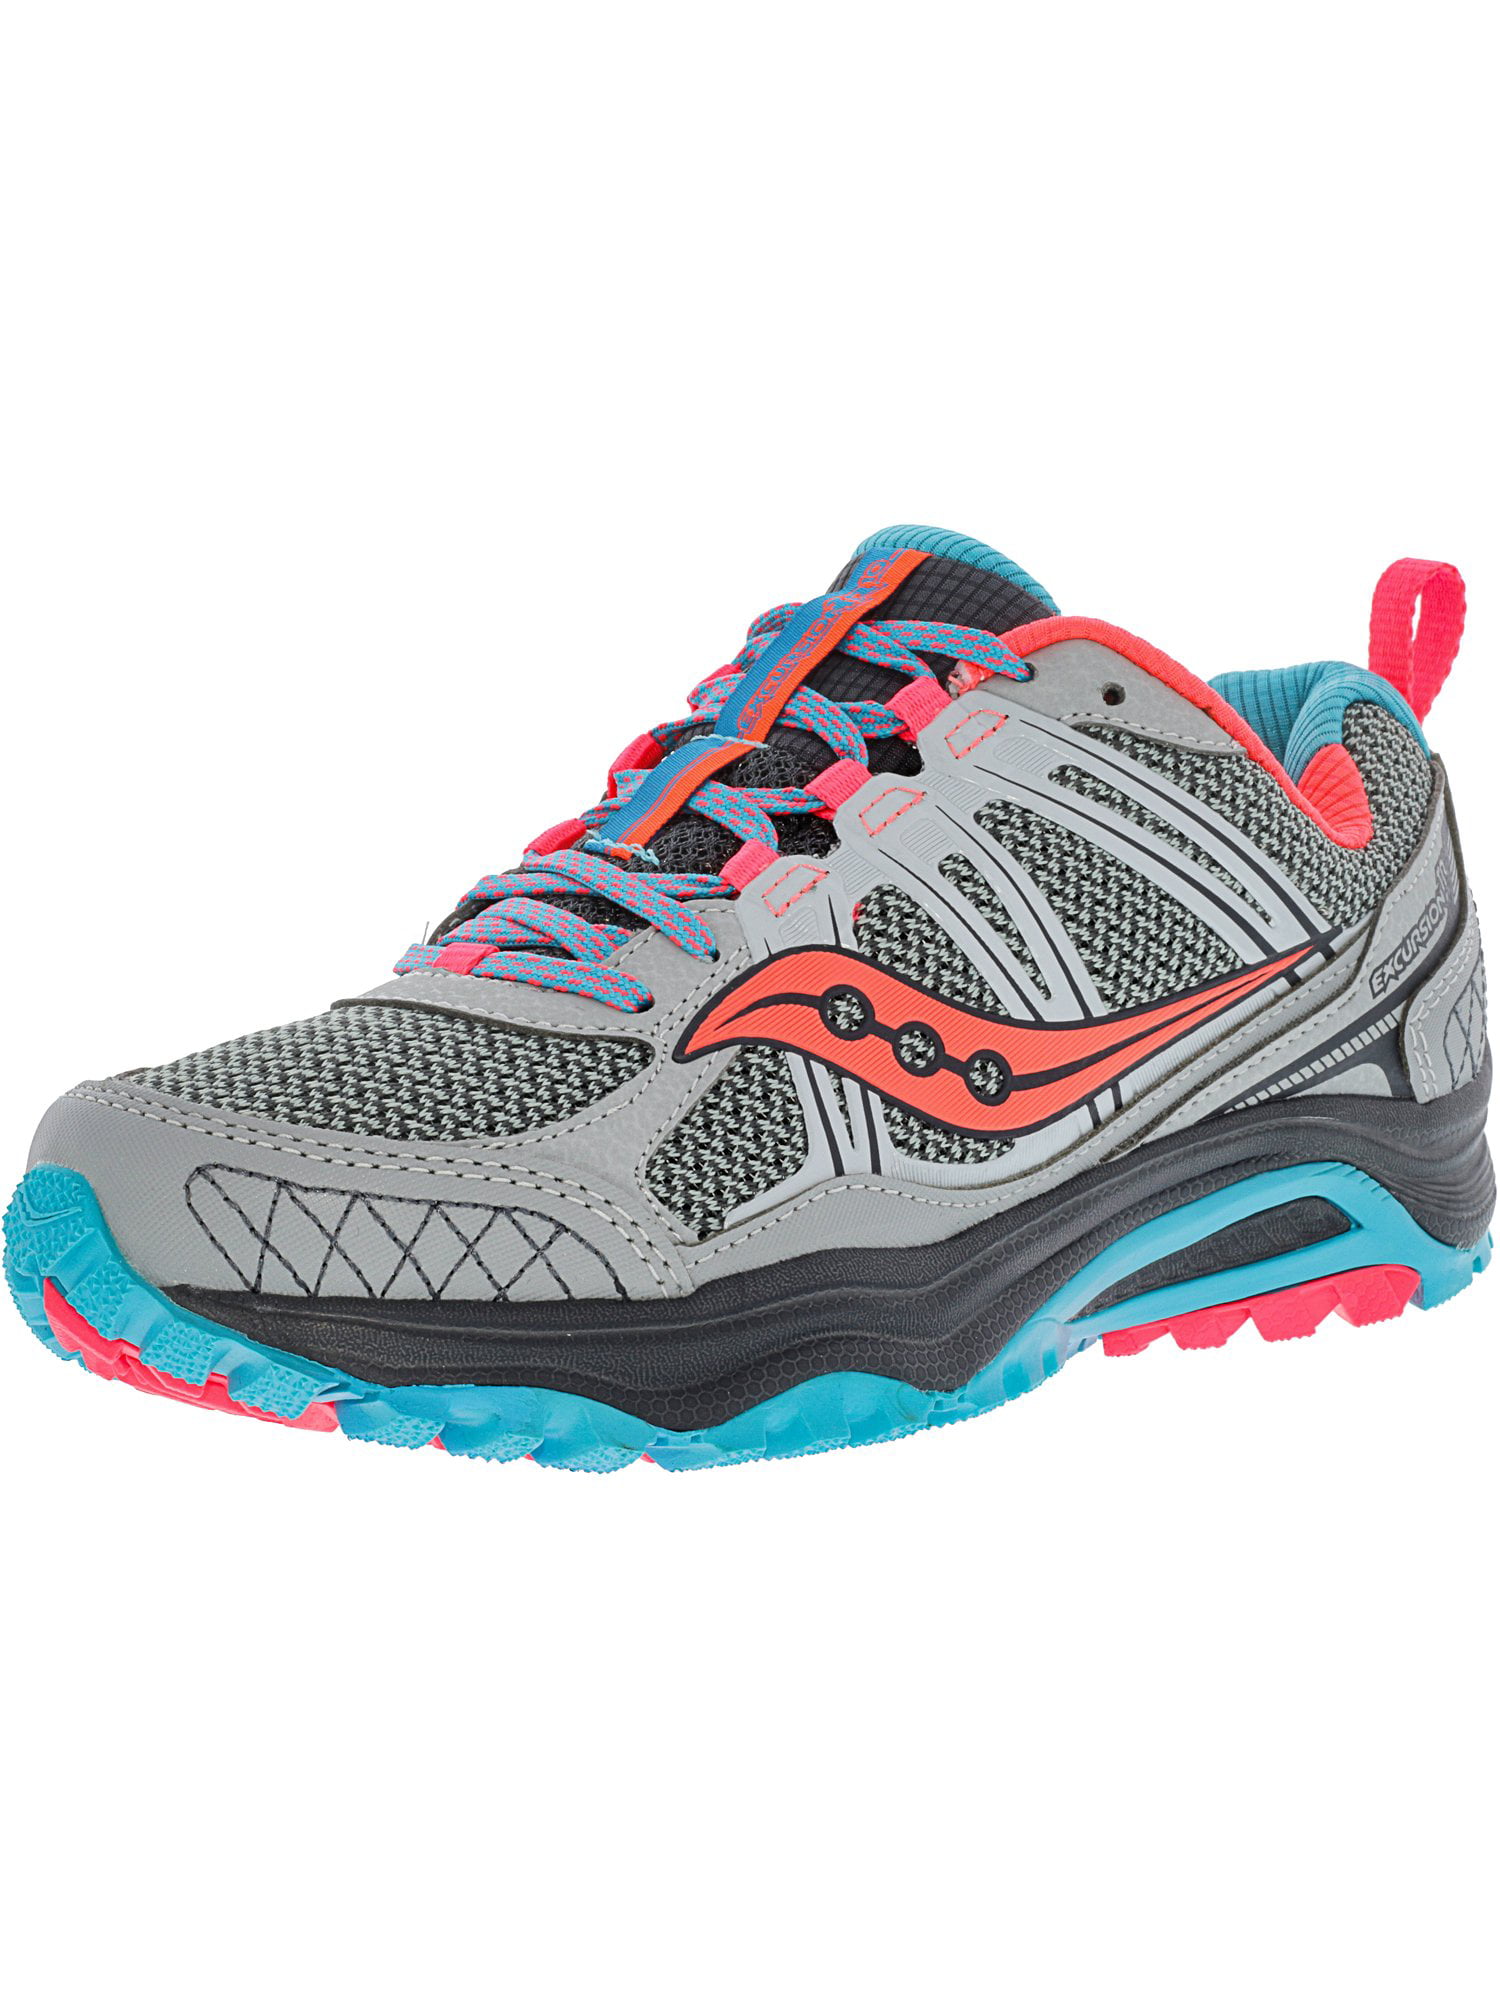 saucony women's excursion tr 10 running shoes